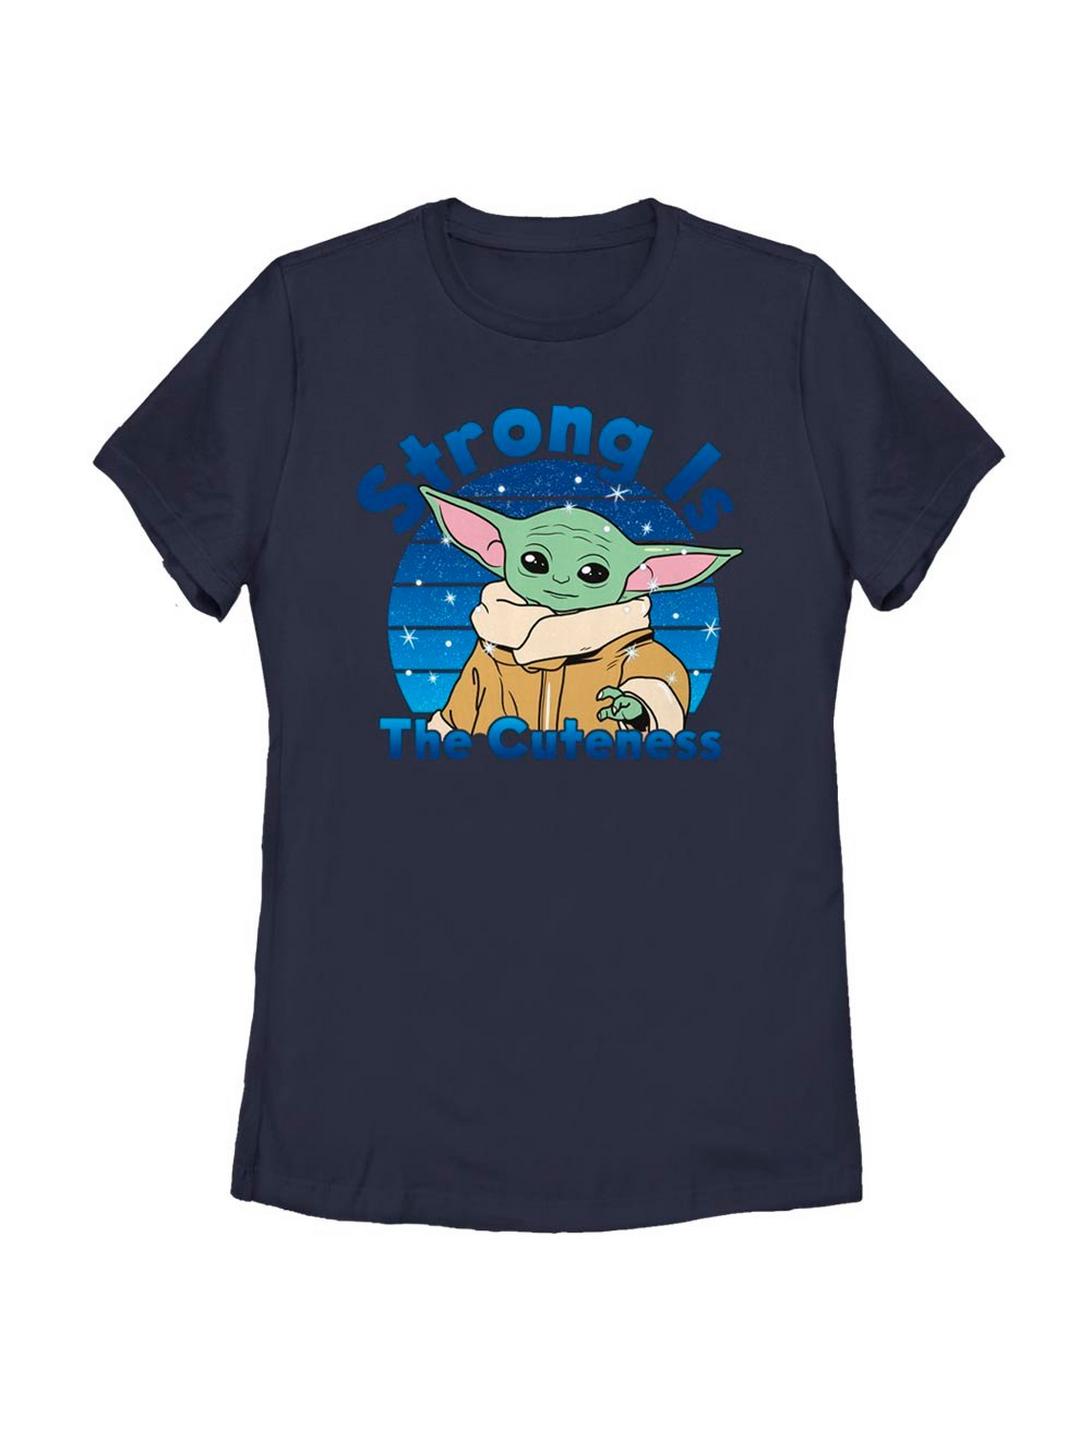 Plus Size Star Wars The Mandalorian The Child Strong Is The Cuteness Womens T-Shirt, NAVY, hi-res